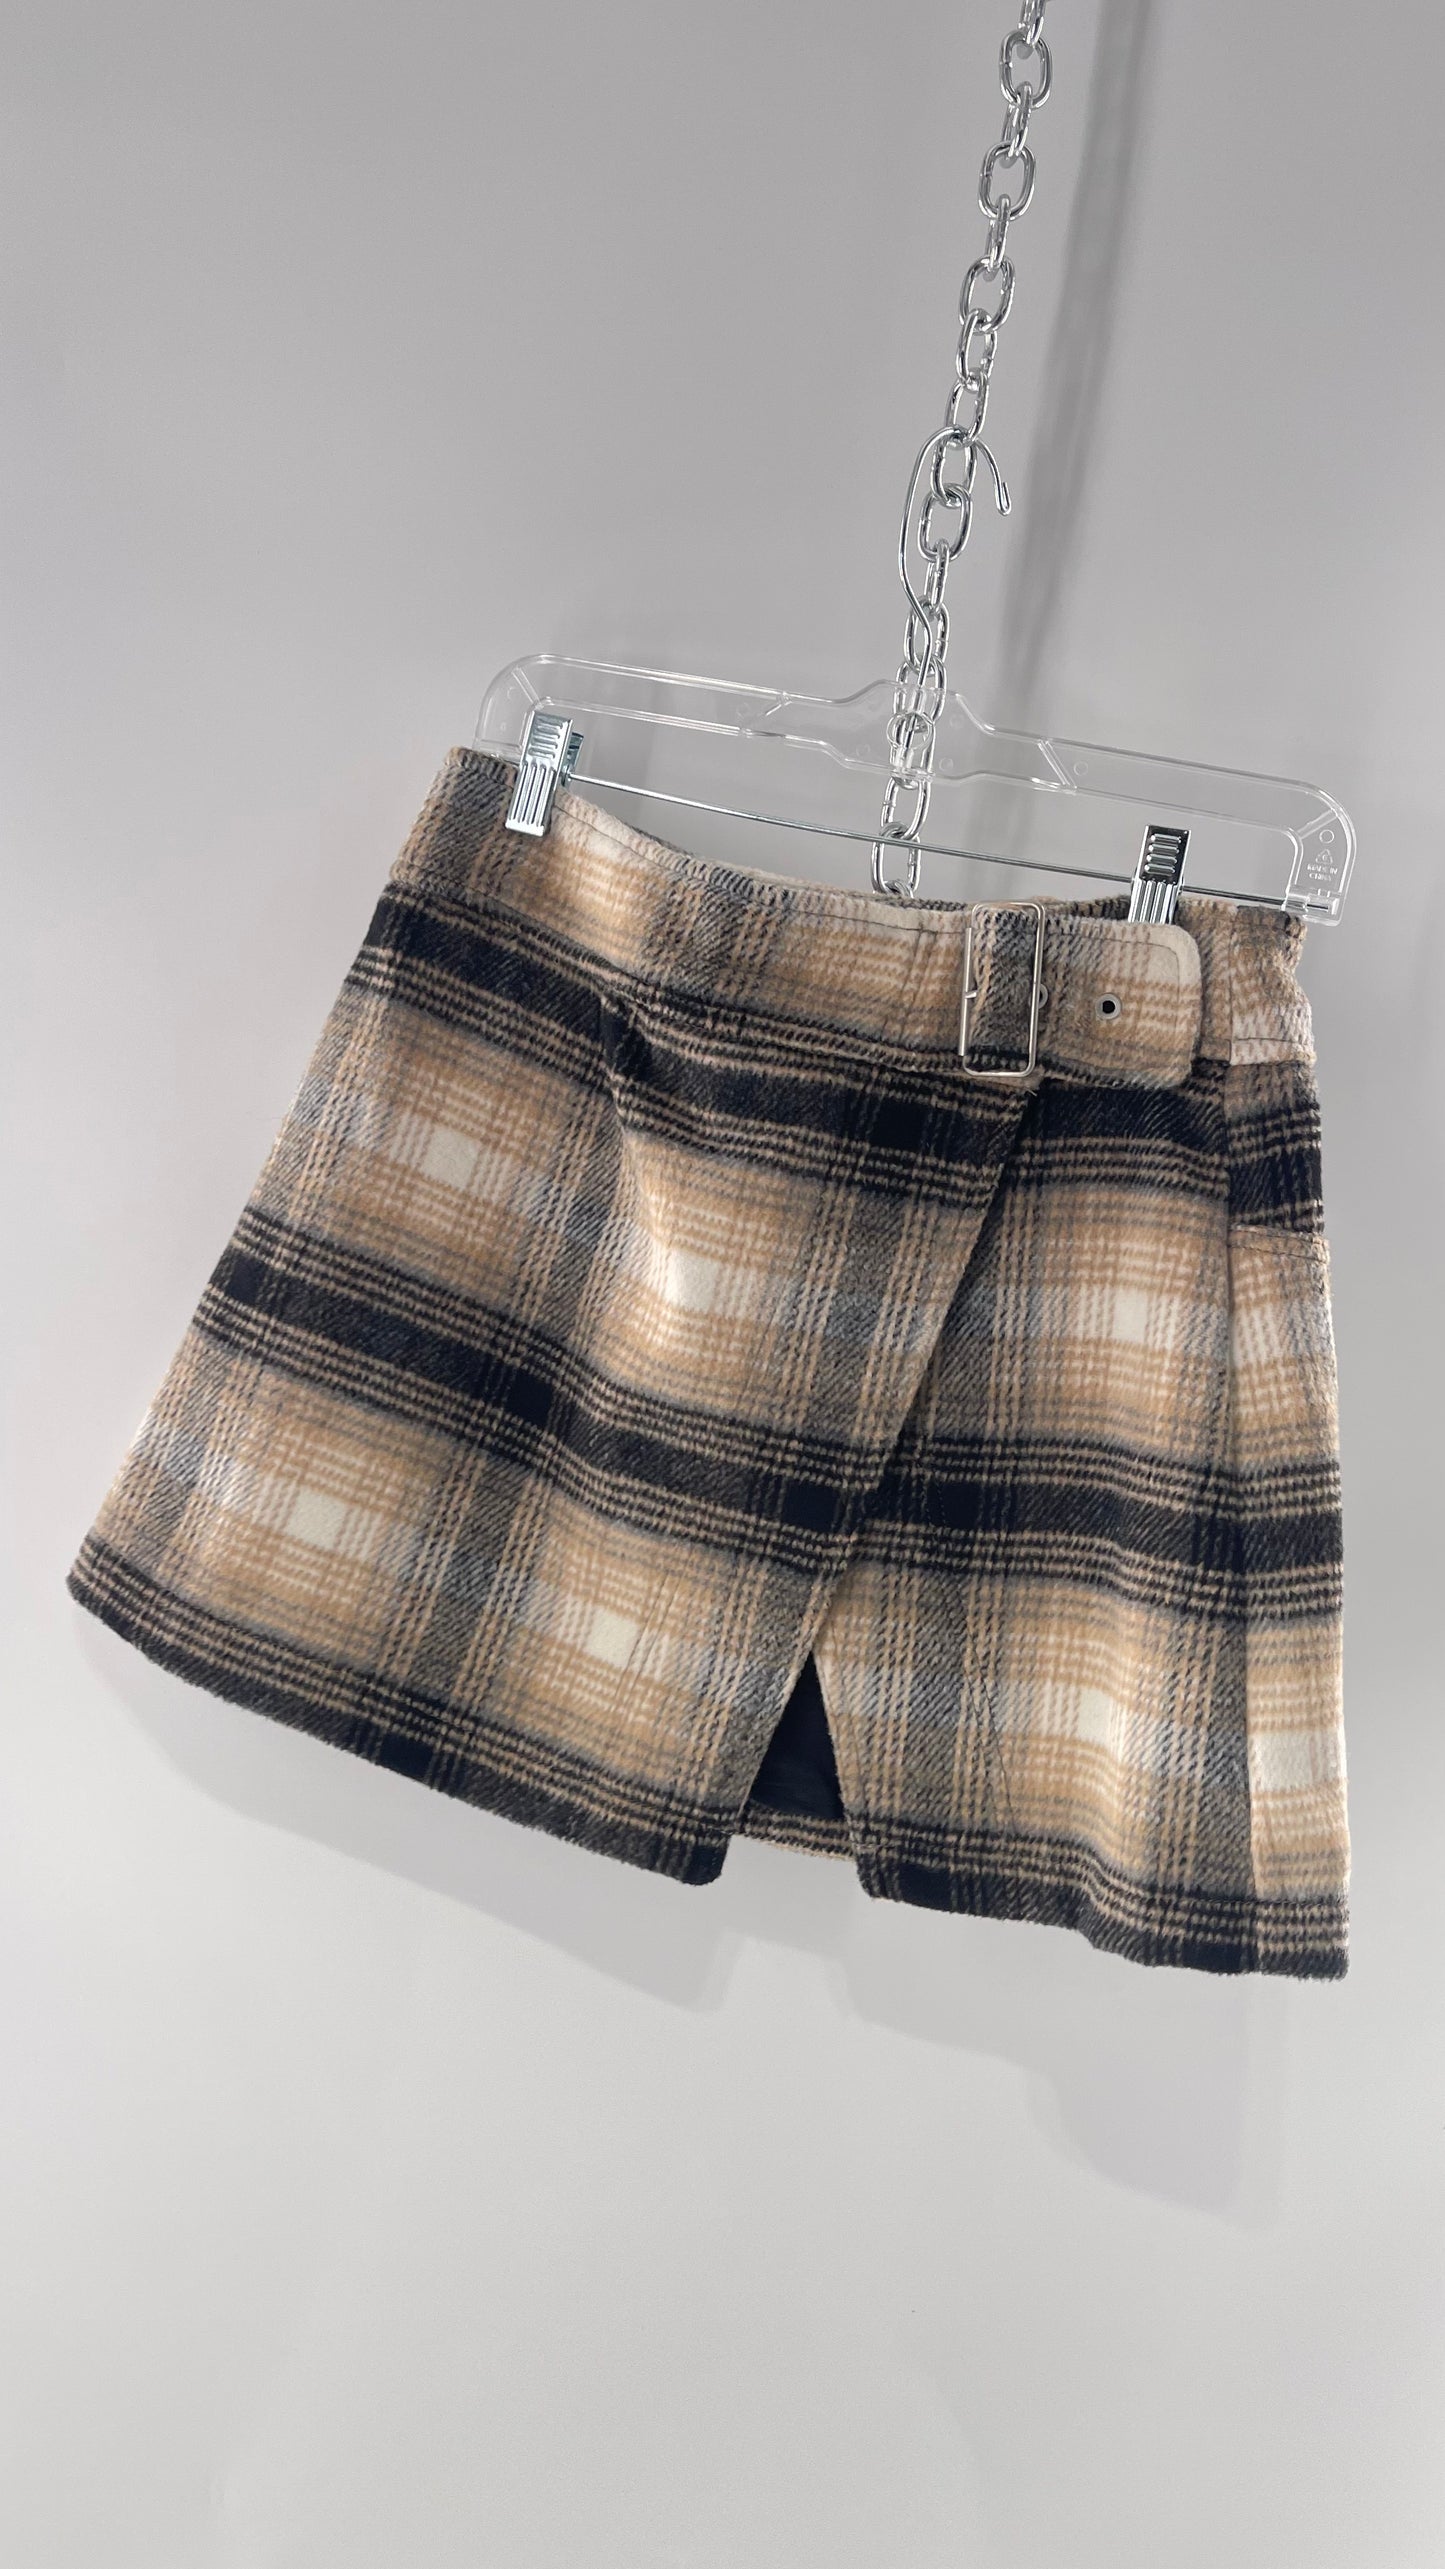 Free People Plaid Beige Gray Soft Mini Skirt with Side Slit and Built in Grommet Belt